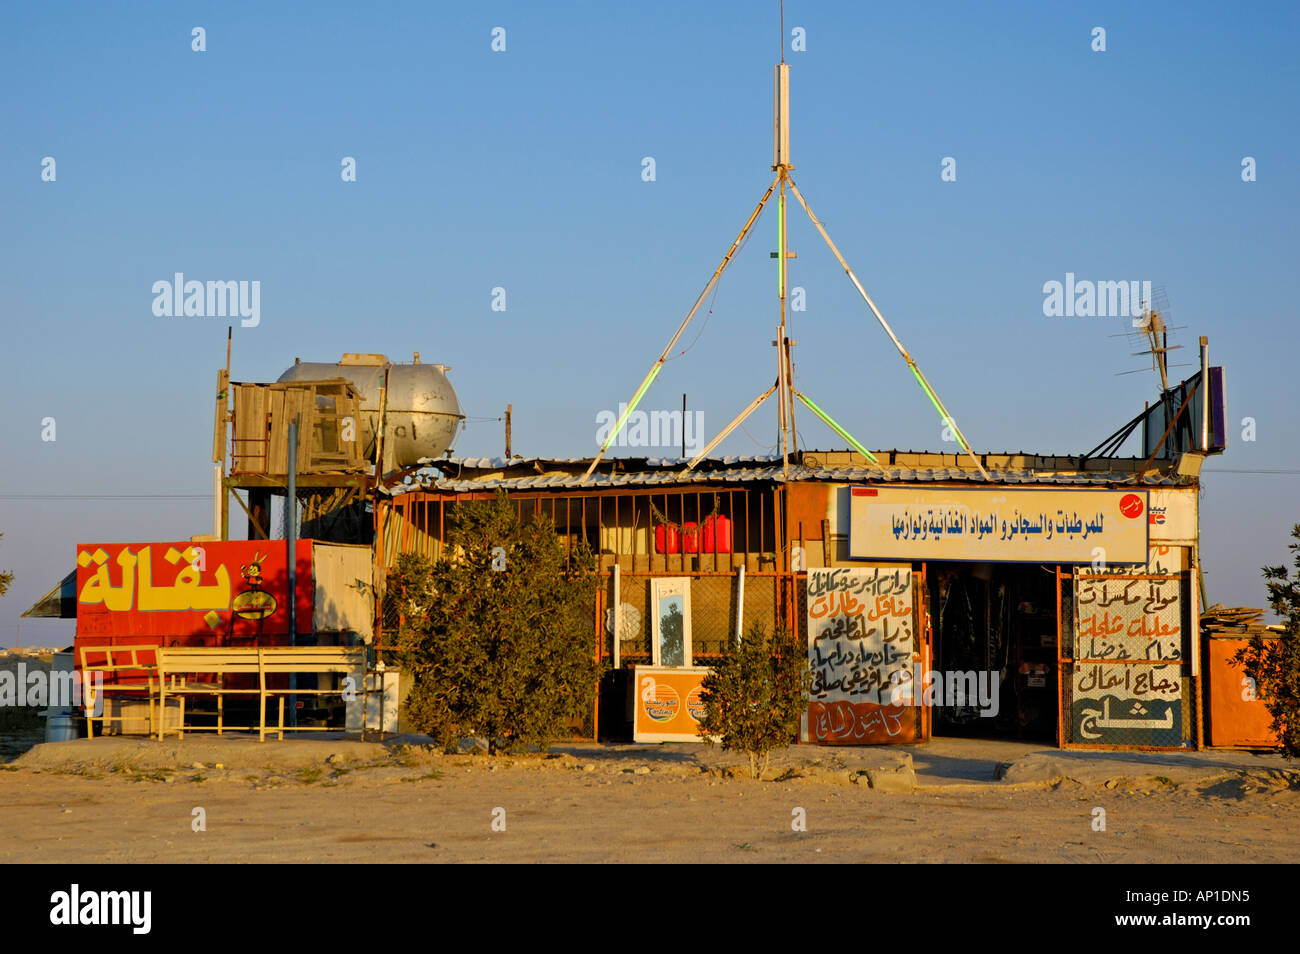 Early morning view of roadside store baqala in Kuwait on isolated desert road to Saudi Arabia Stock Photo